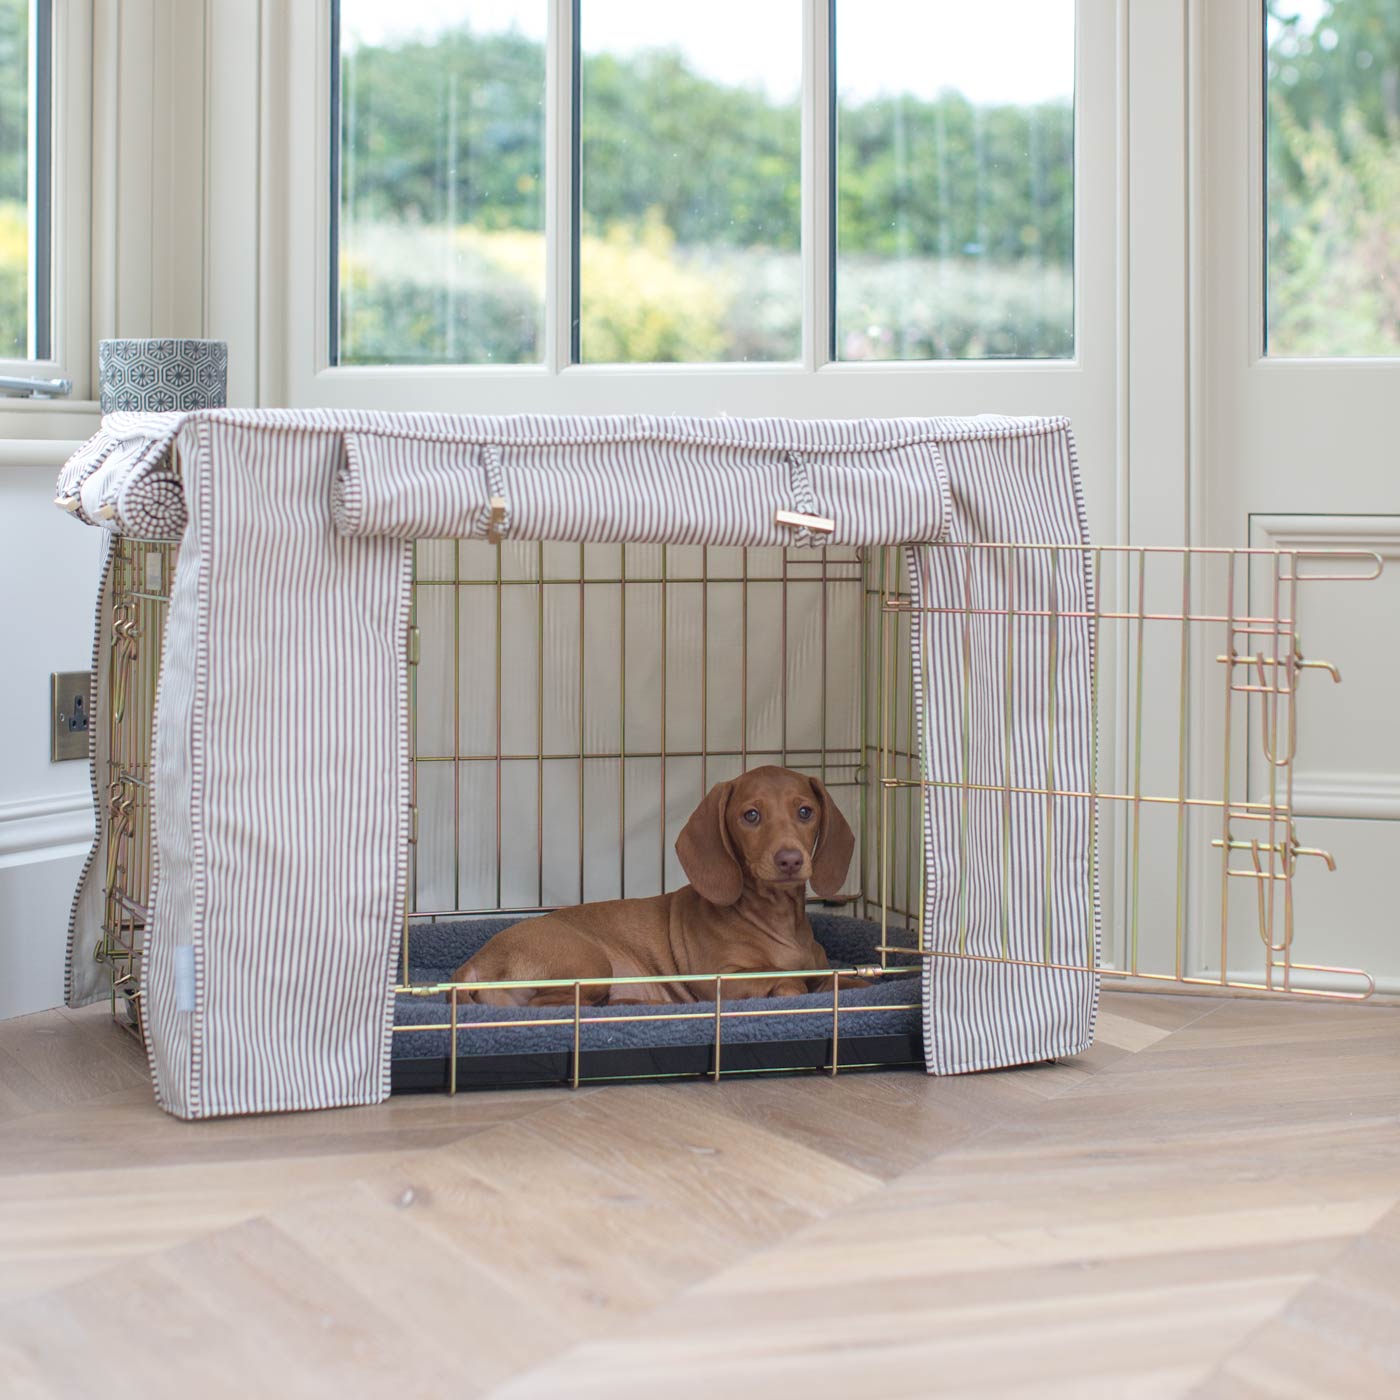 Luxury Gold Dog Cage With Regency Stripe Cage Cover, The Perfect Dog Crate For The Ultimate Naptime, Available Now at Lords & Labradors US